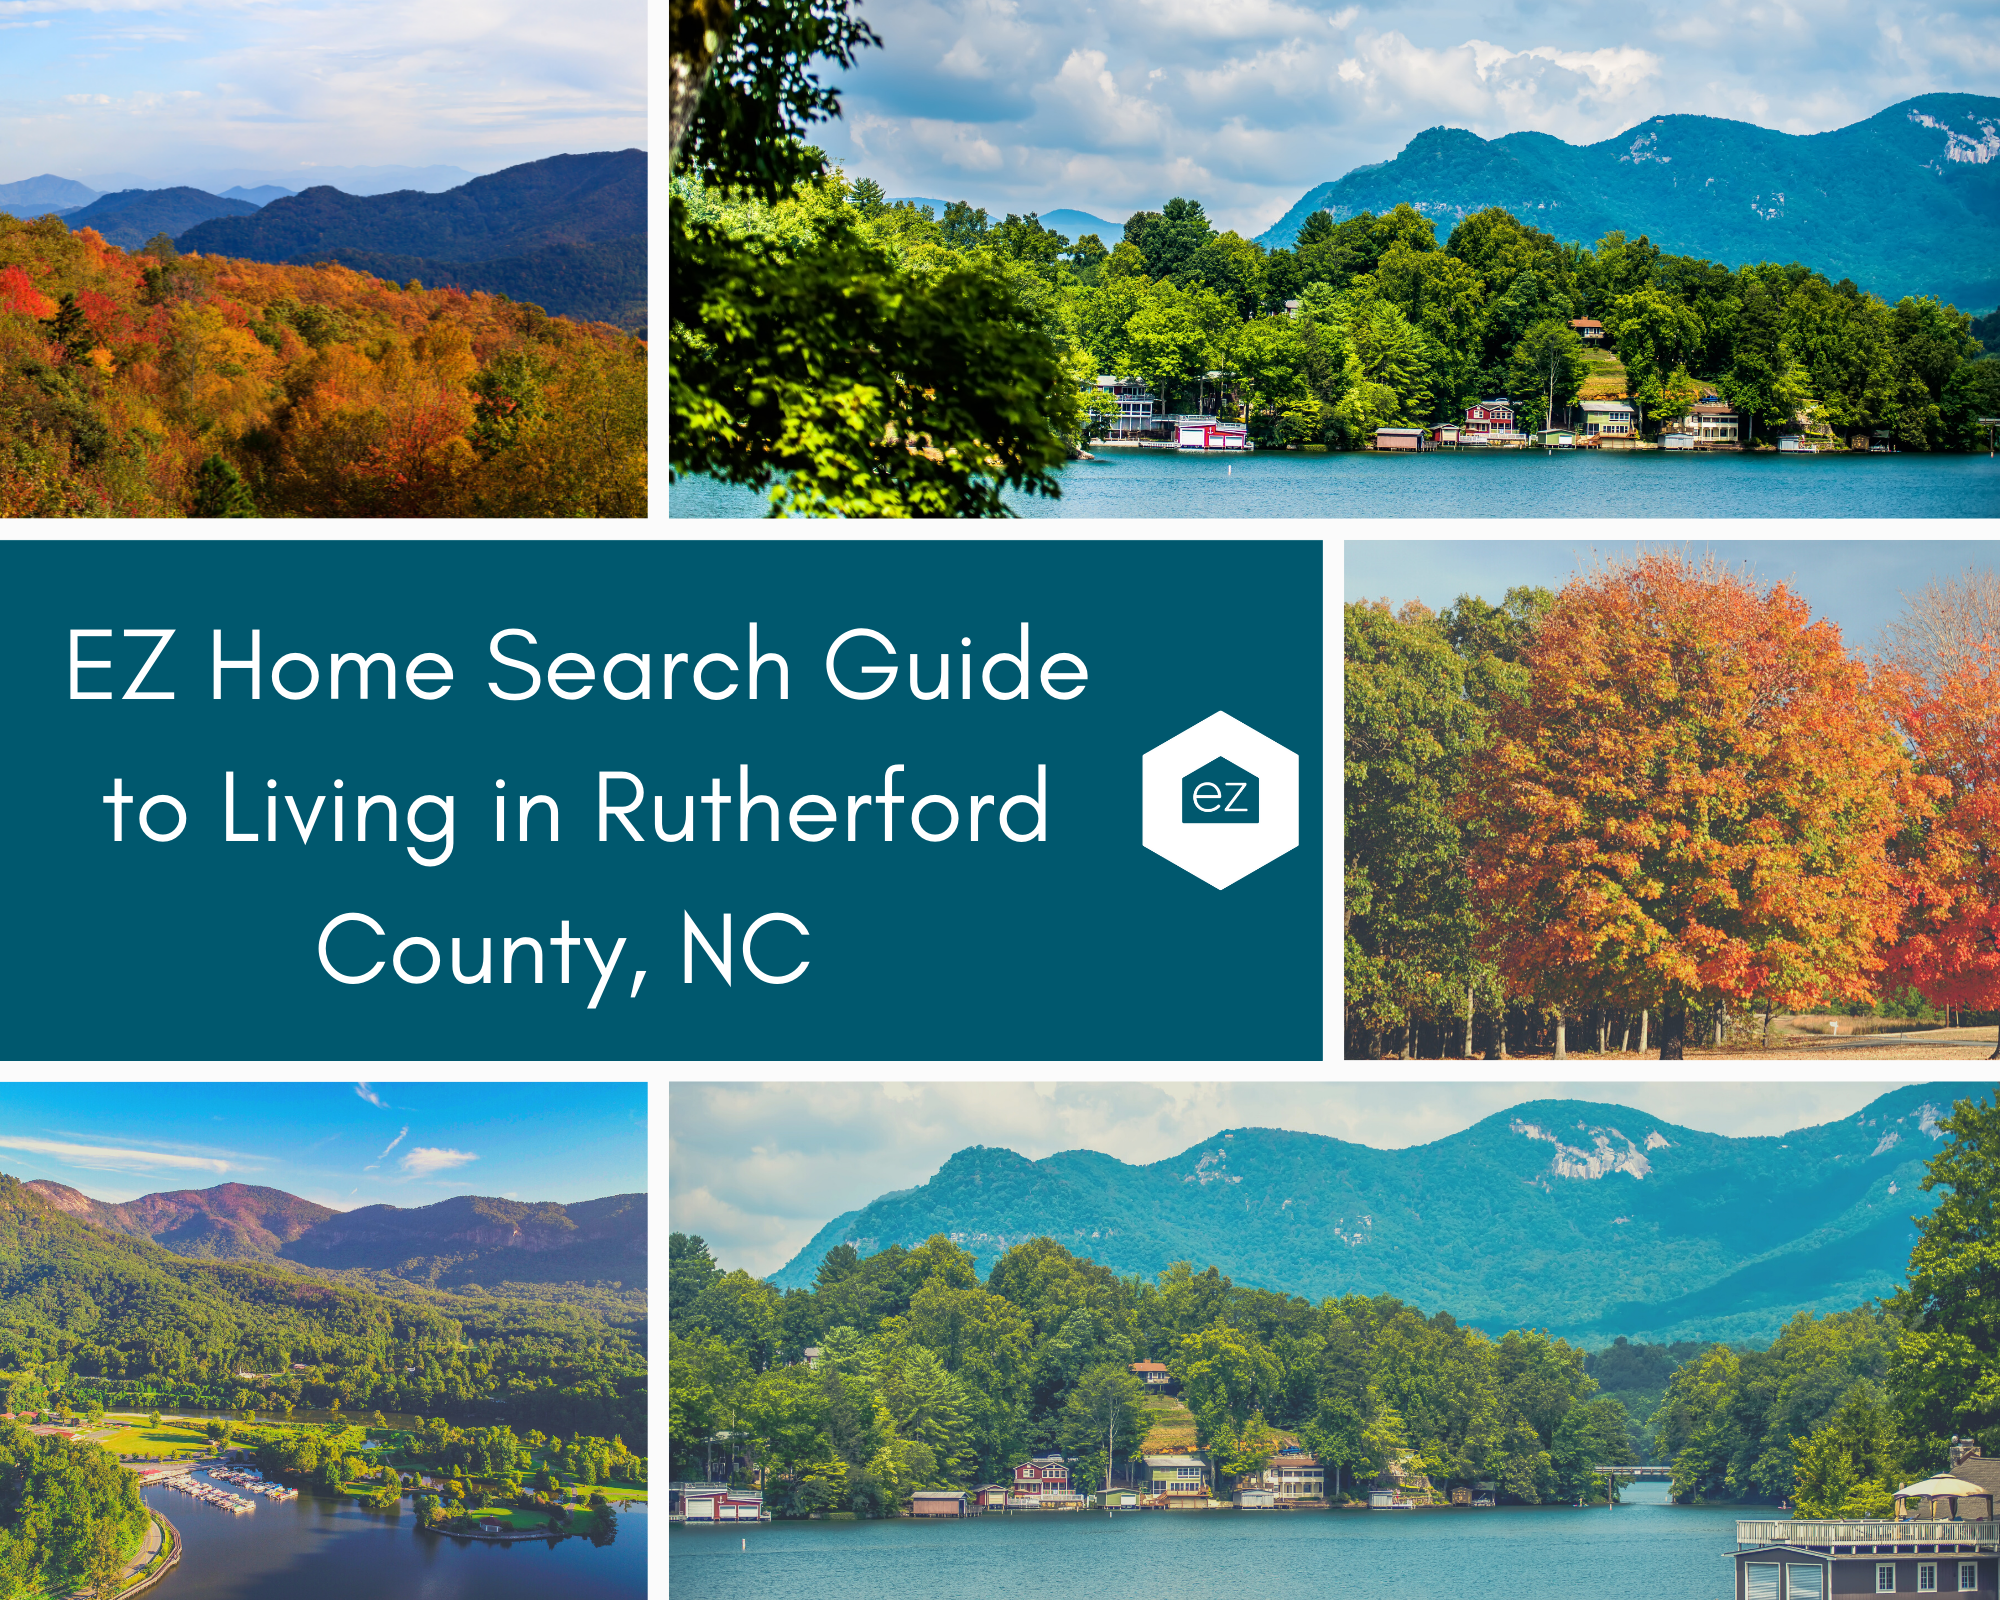 Photos of Rutherford County, NC and Lake Lure